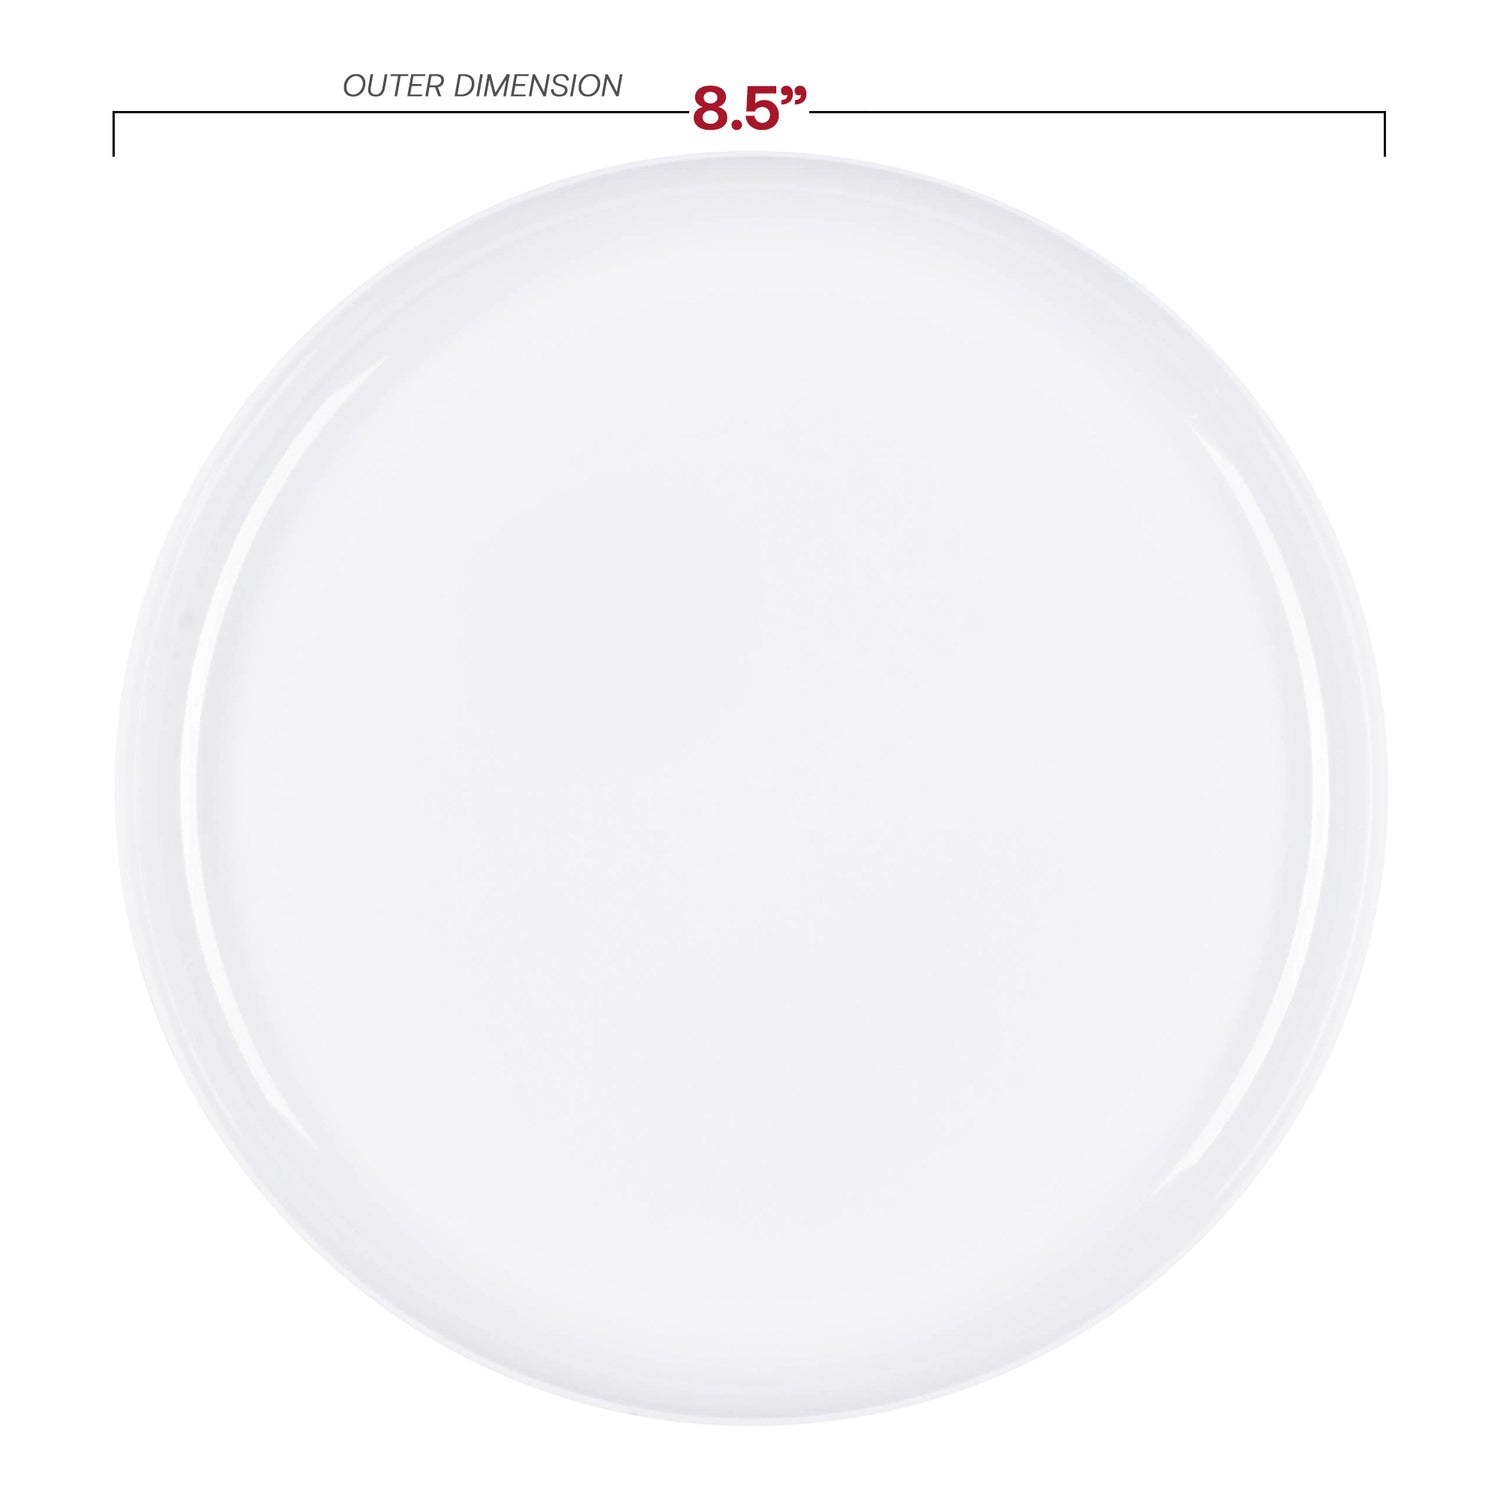 White Flat Round Disposable Plastic Appetizer/Salad Plates (8.5") Dimension | The Kaya Collection